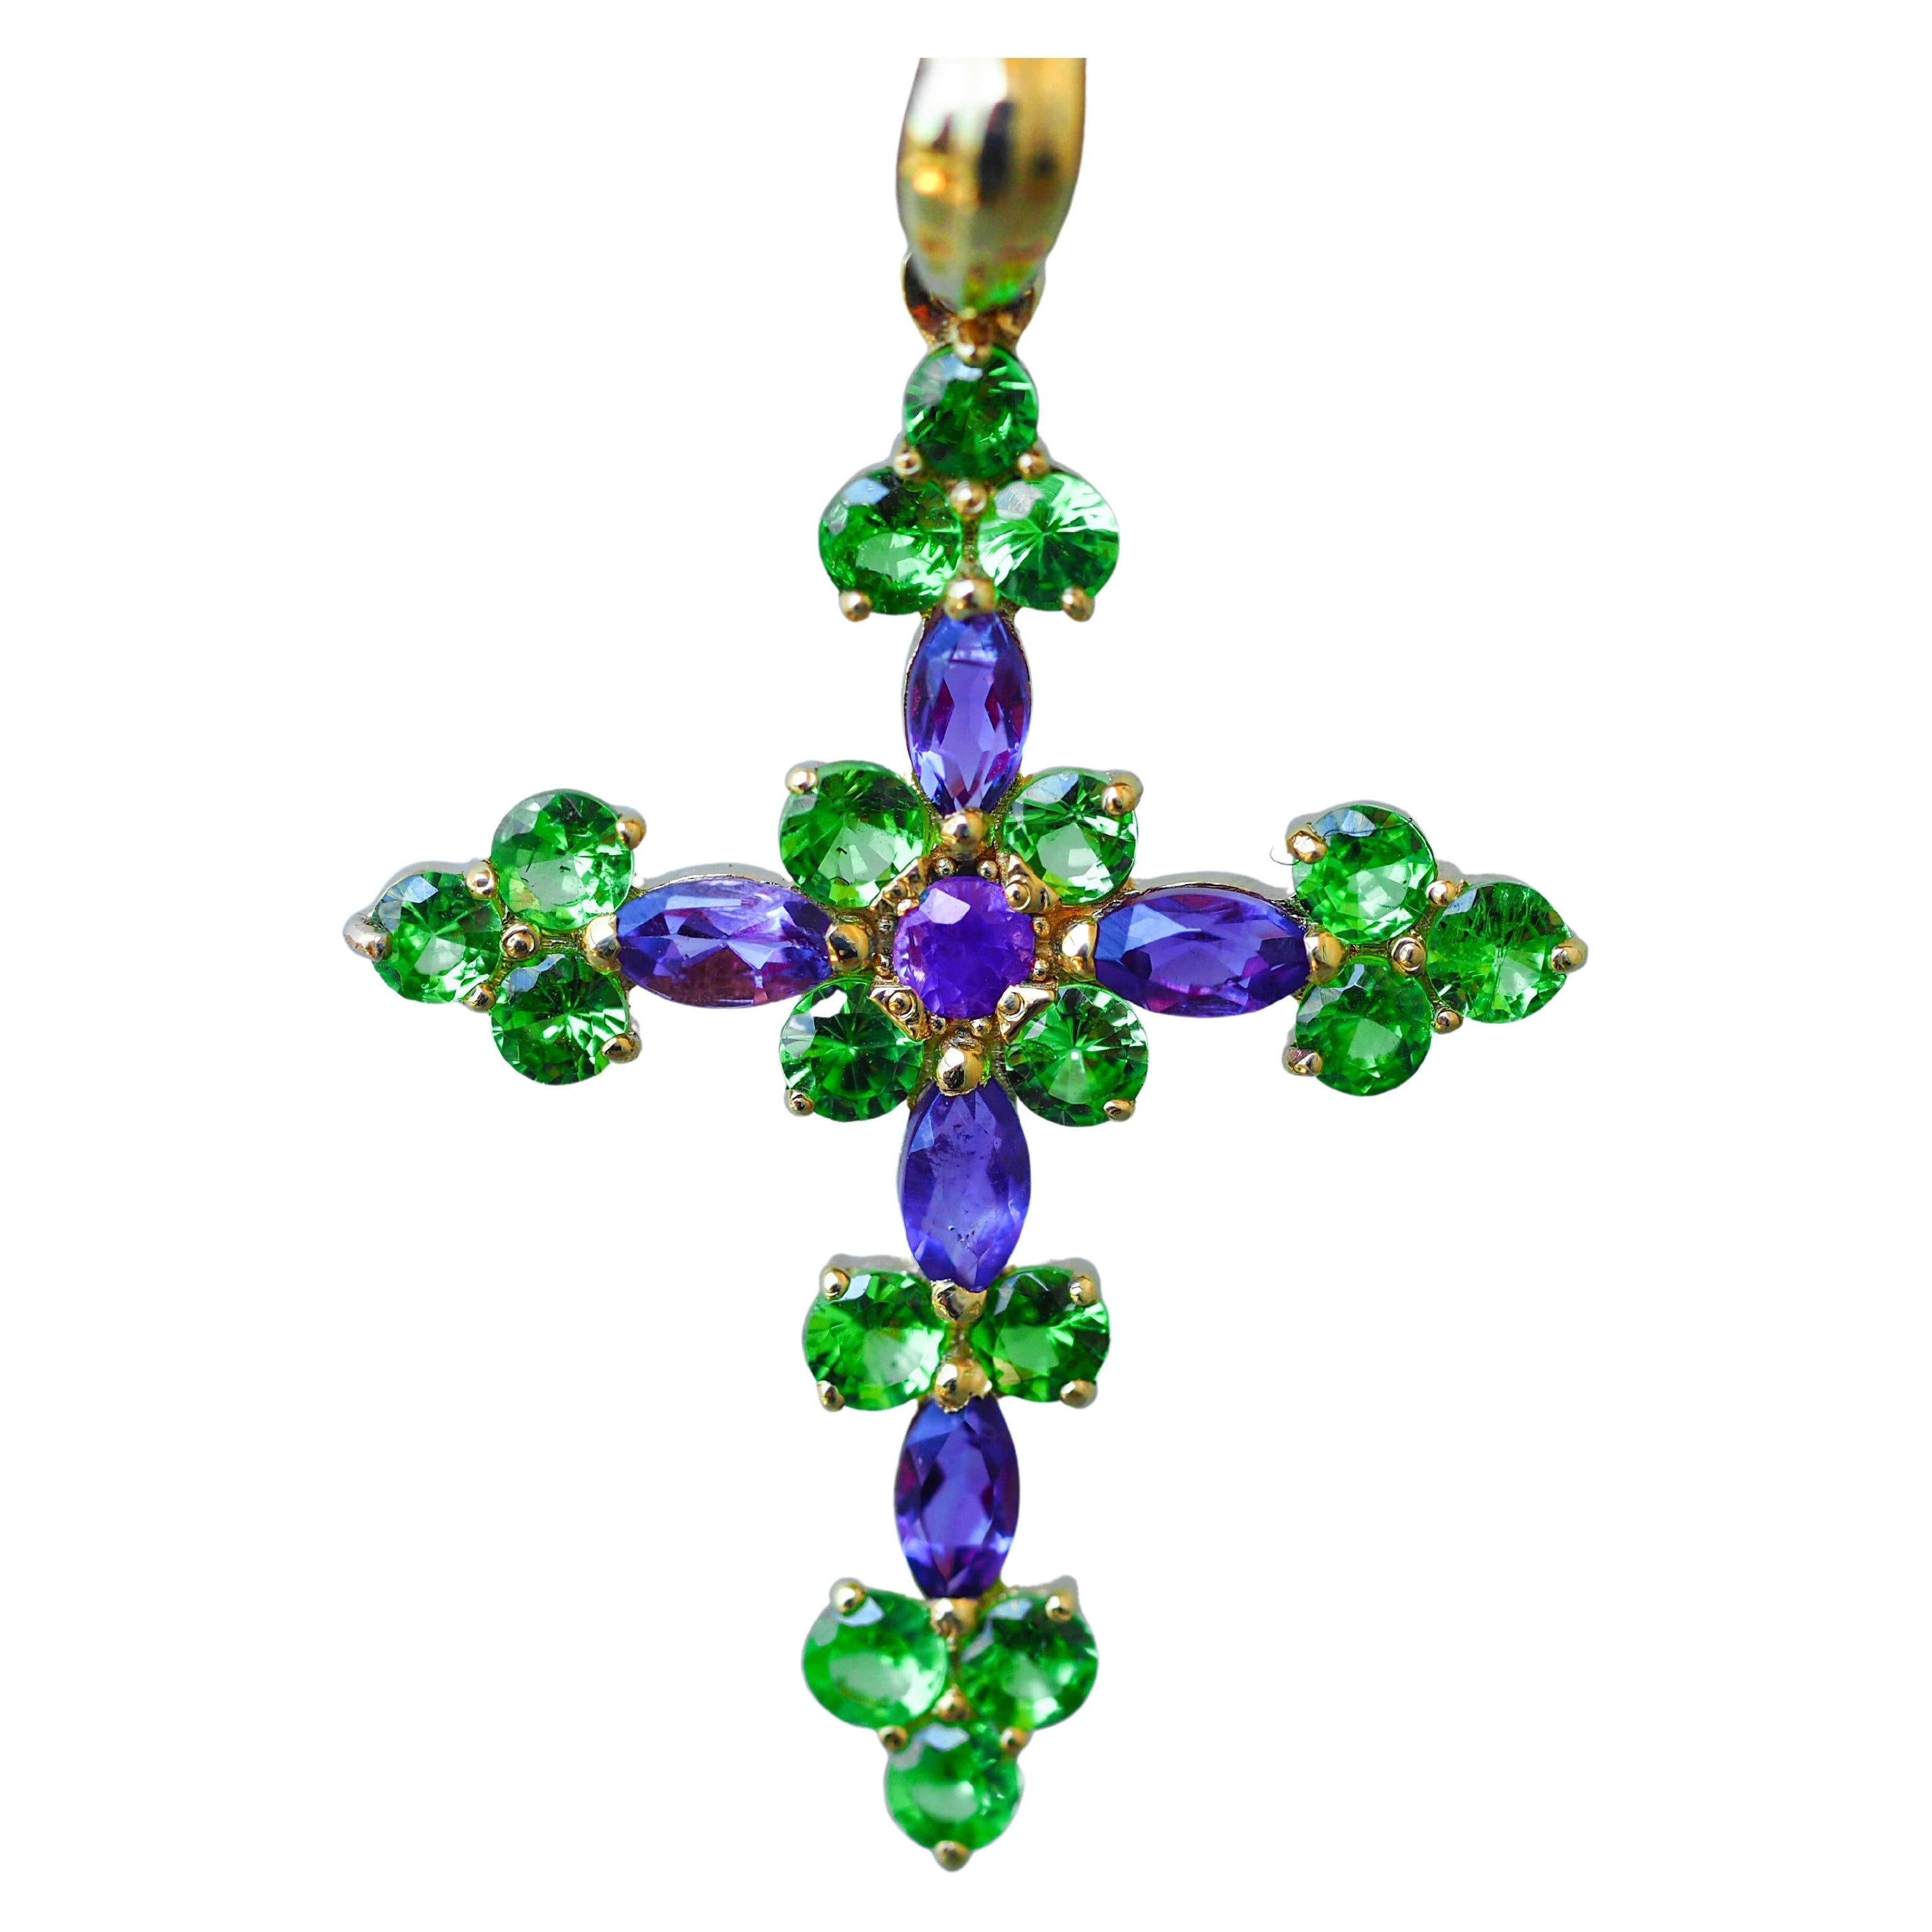 14k Gold Cross Pendant with Colored Stones: Amethysts and Tsavorites!